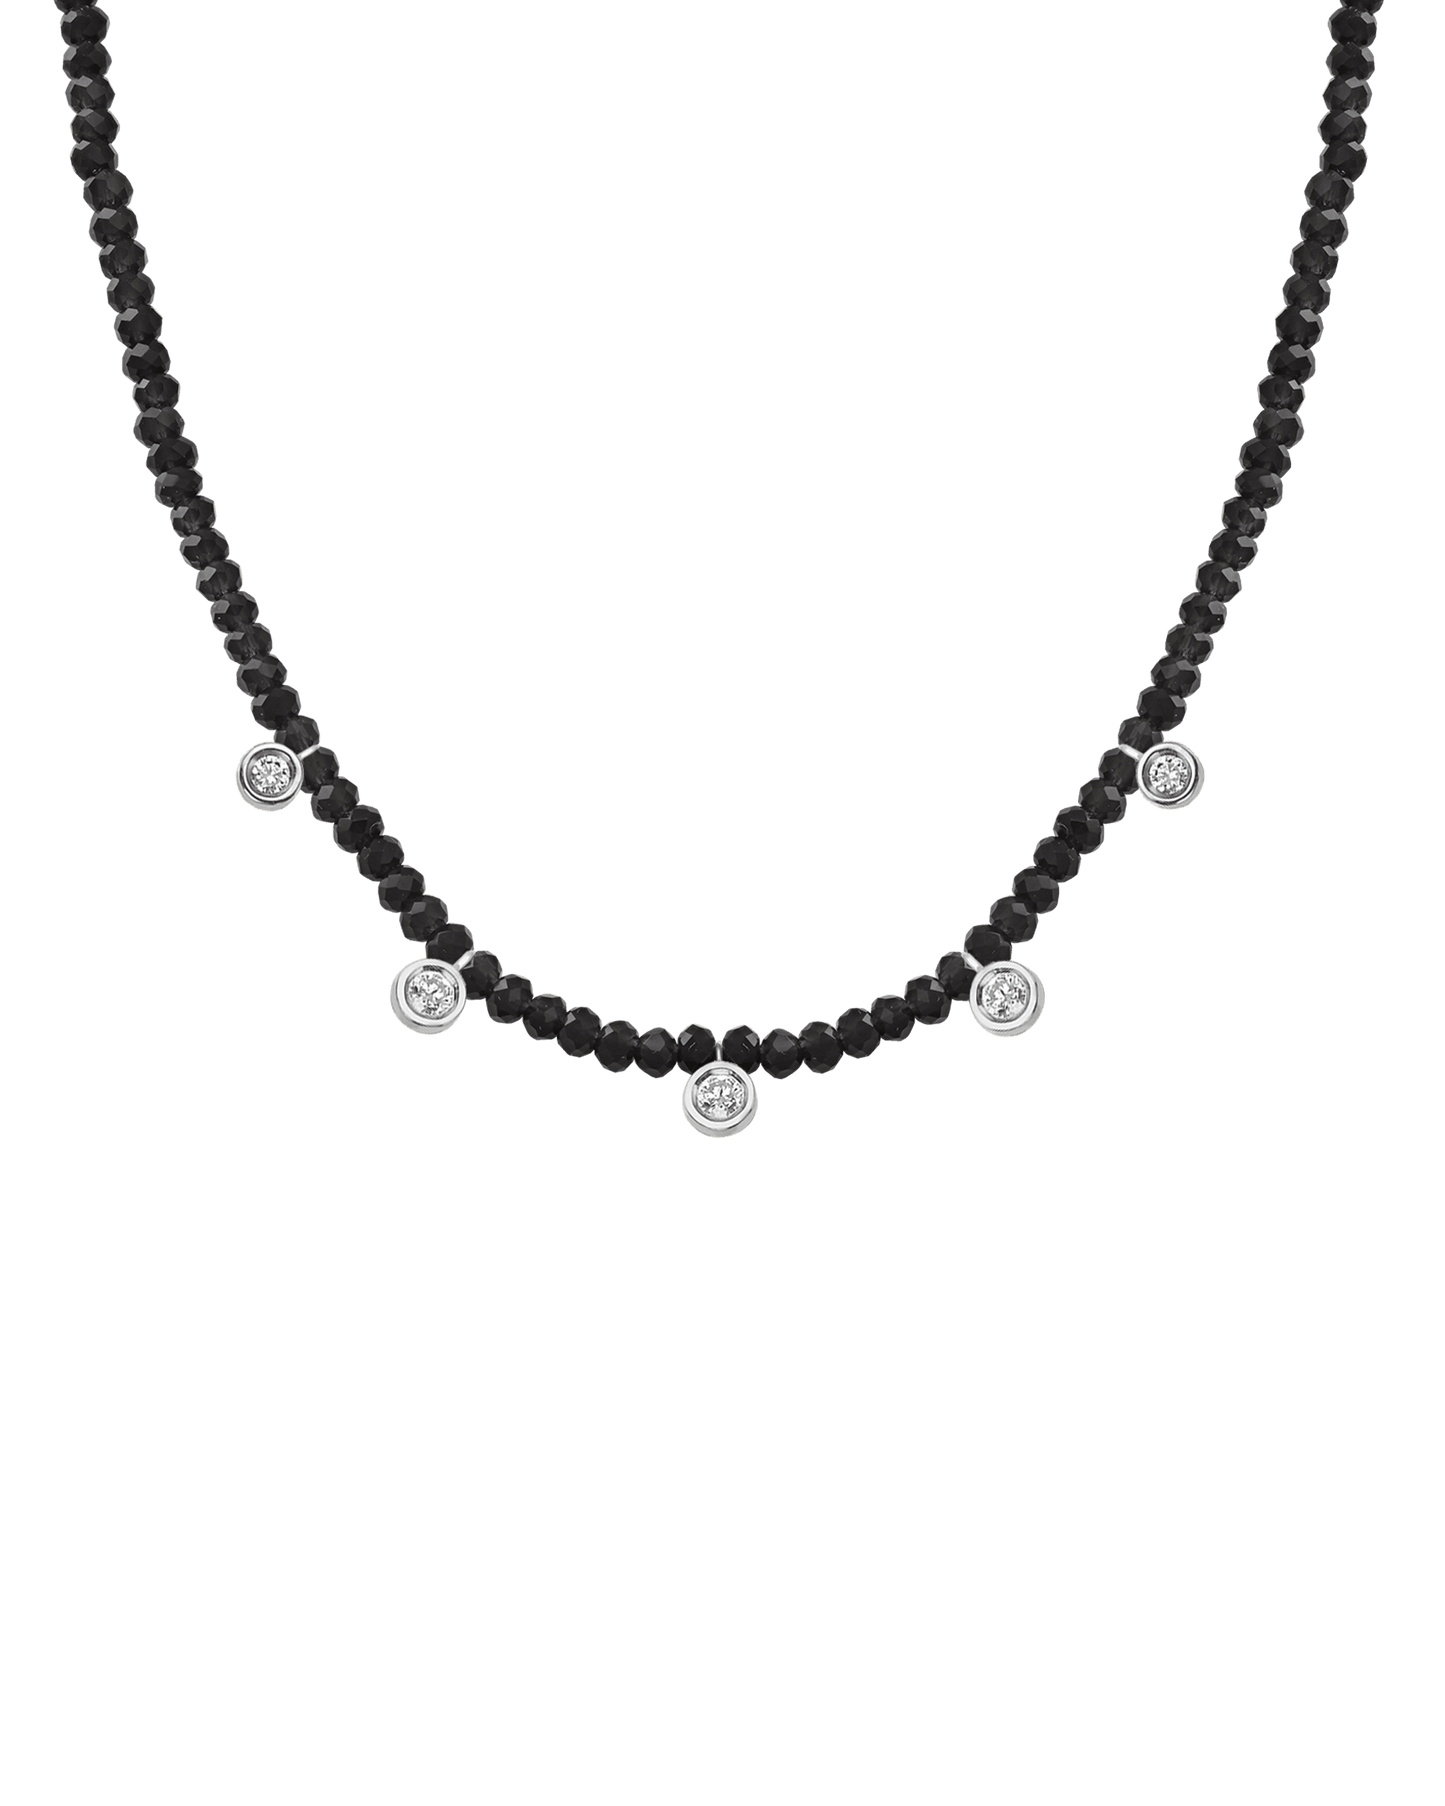 Turquoise Gemstone & Five diamonds Necklace - 14K White Gold Necklaces magal-dev Glass Beads Black Spinnel 14" - Collar 